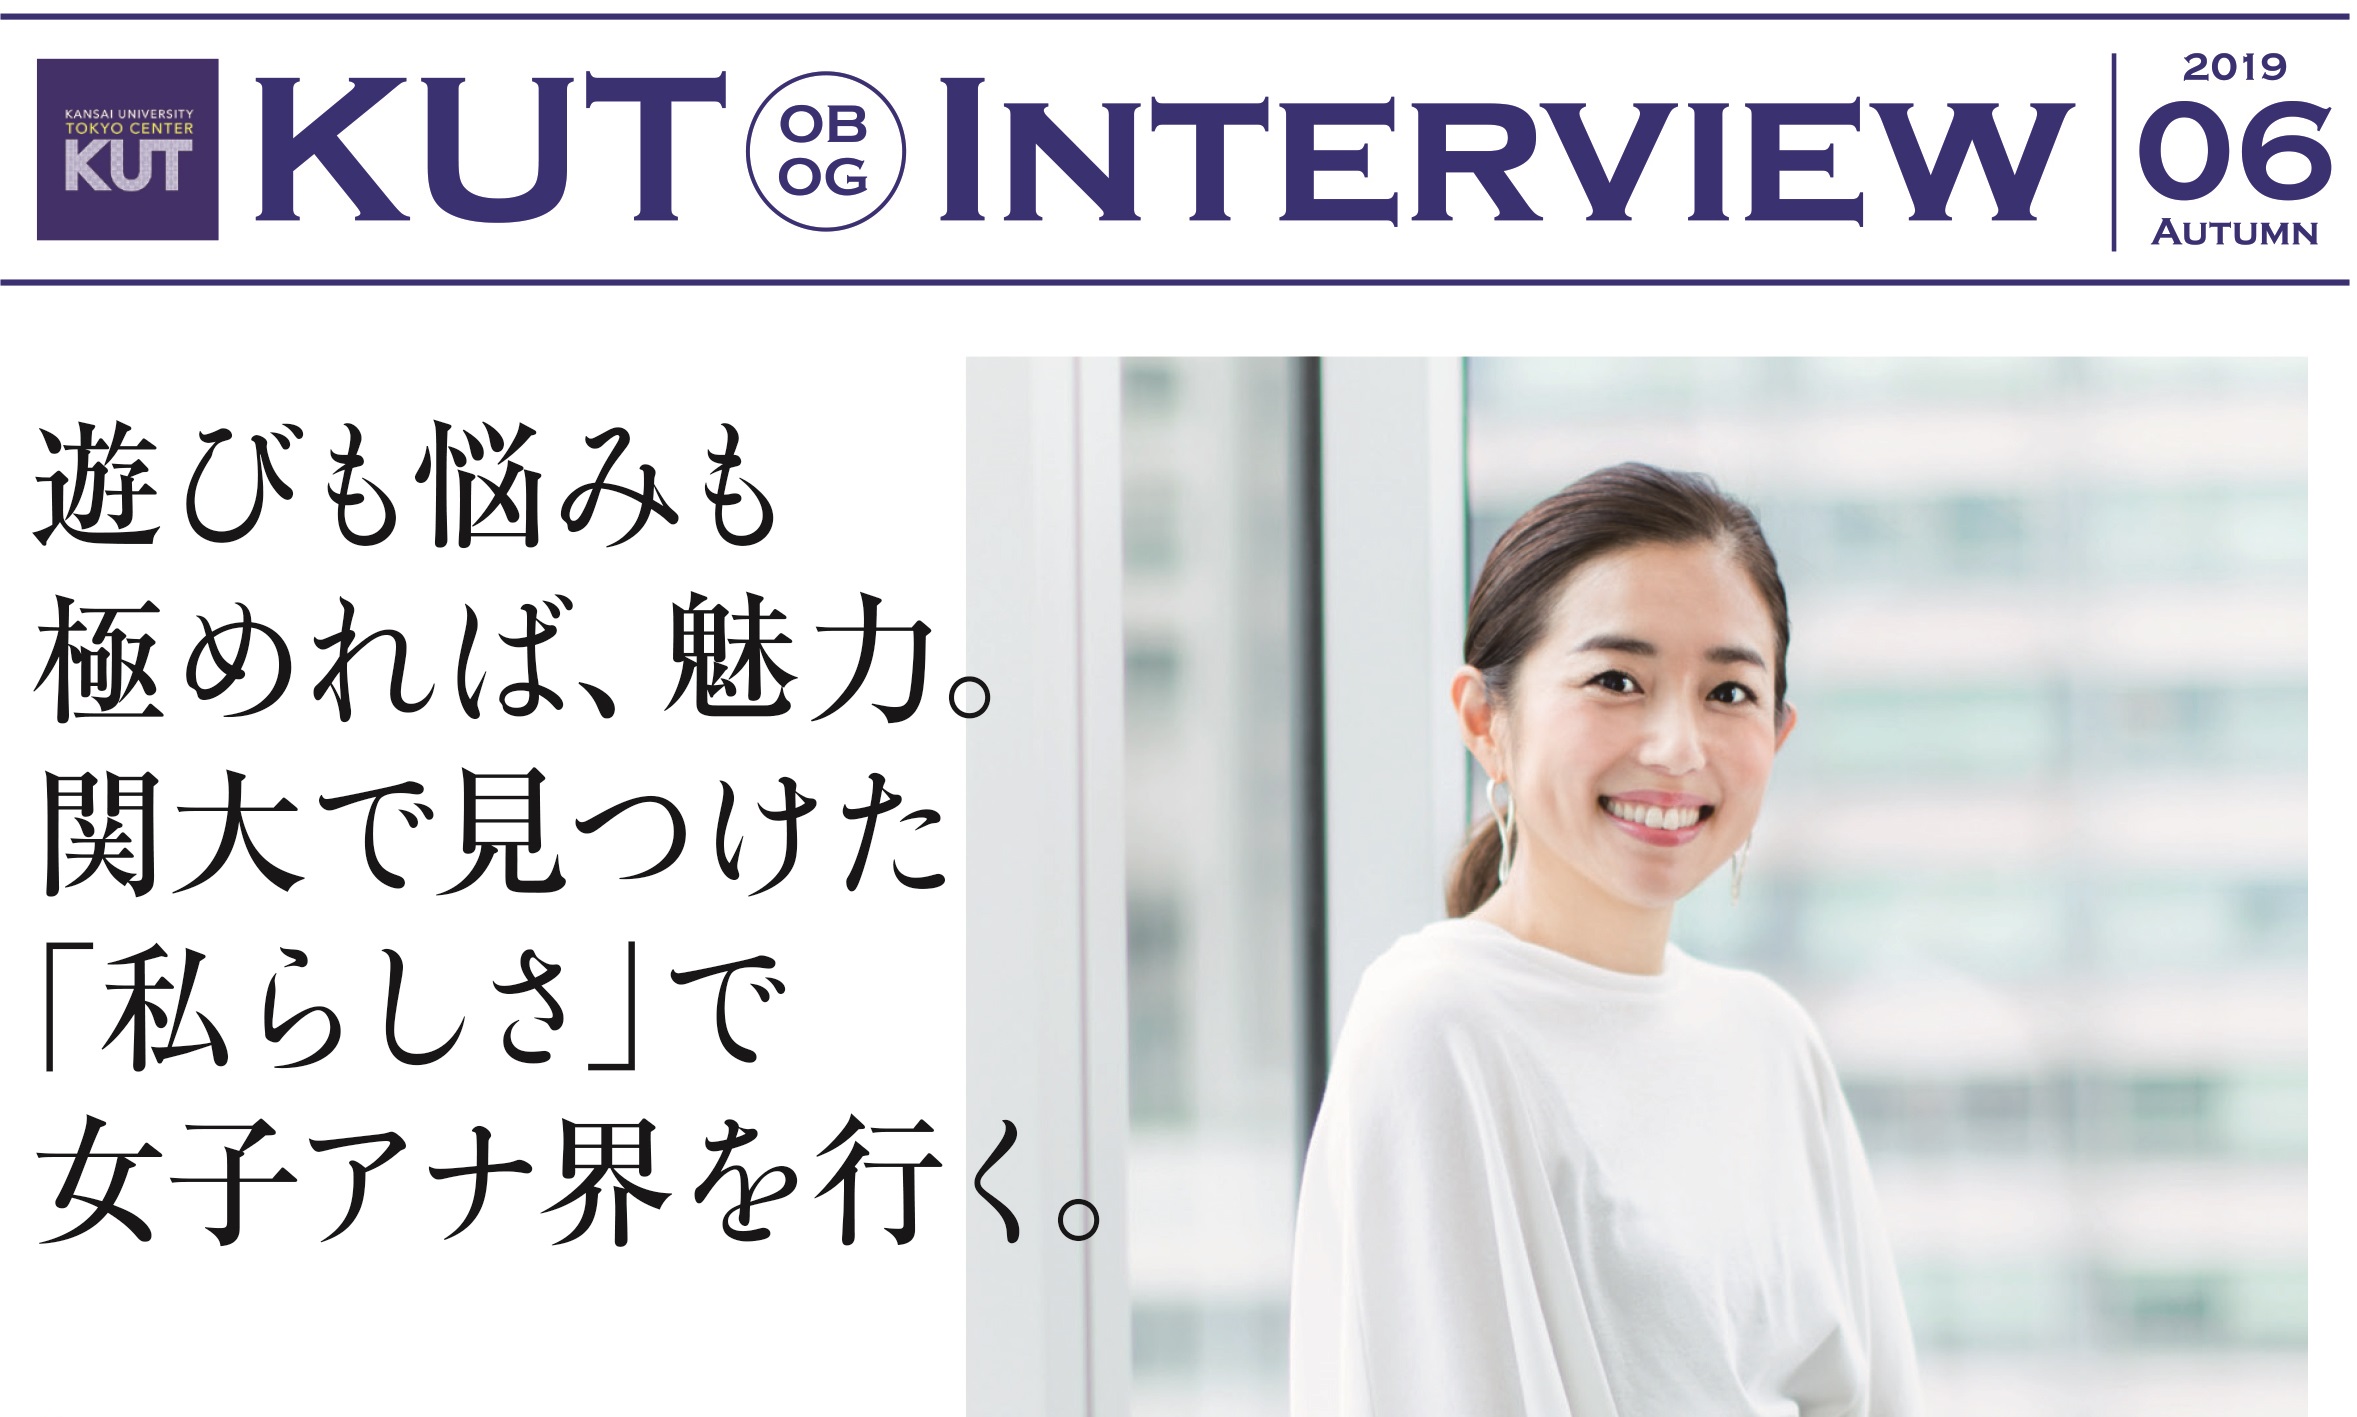 ＜KUT INTERVIEW 第６号＞ 首都圏で活躍する卒業生をご紹介します